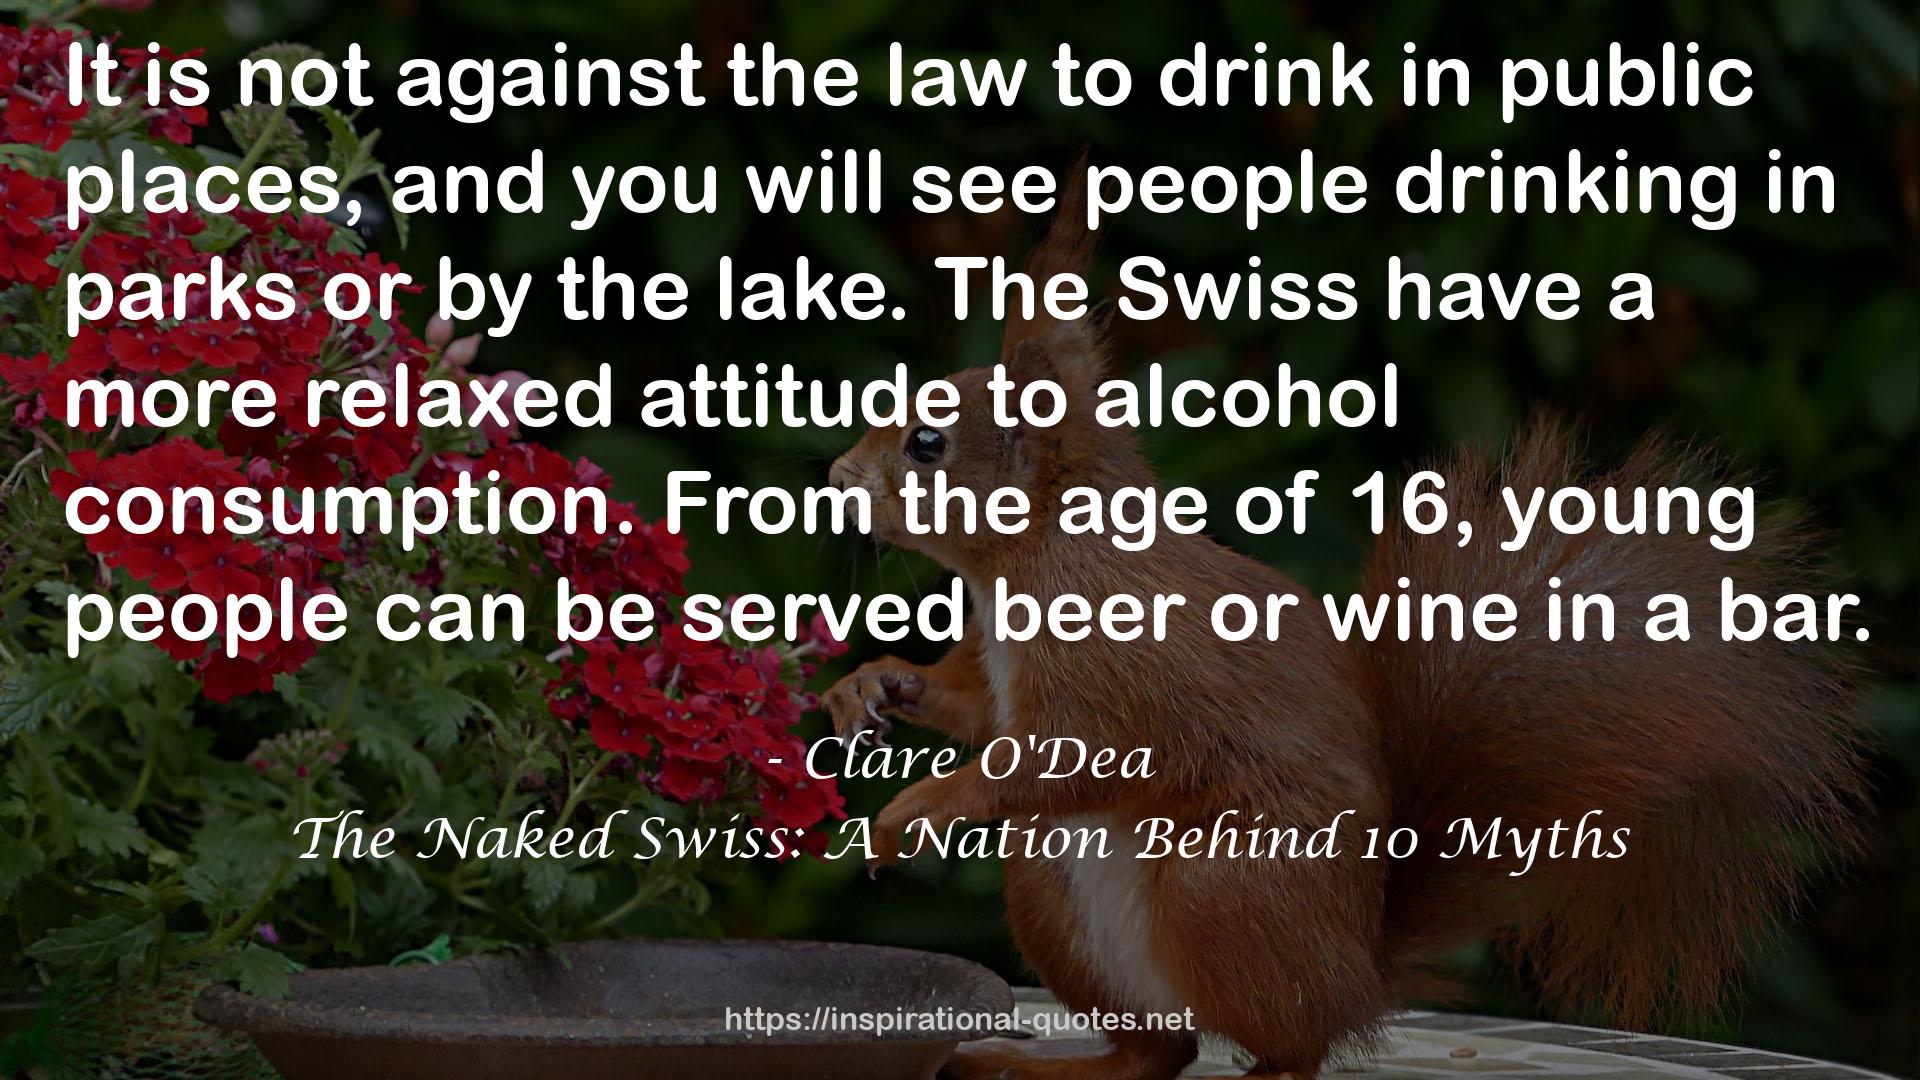 The Naked Swiss: A Nation Behind 10 Myths QUOTES